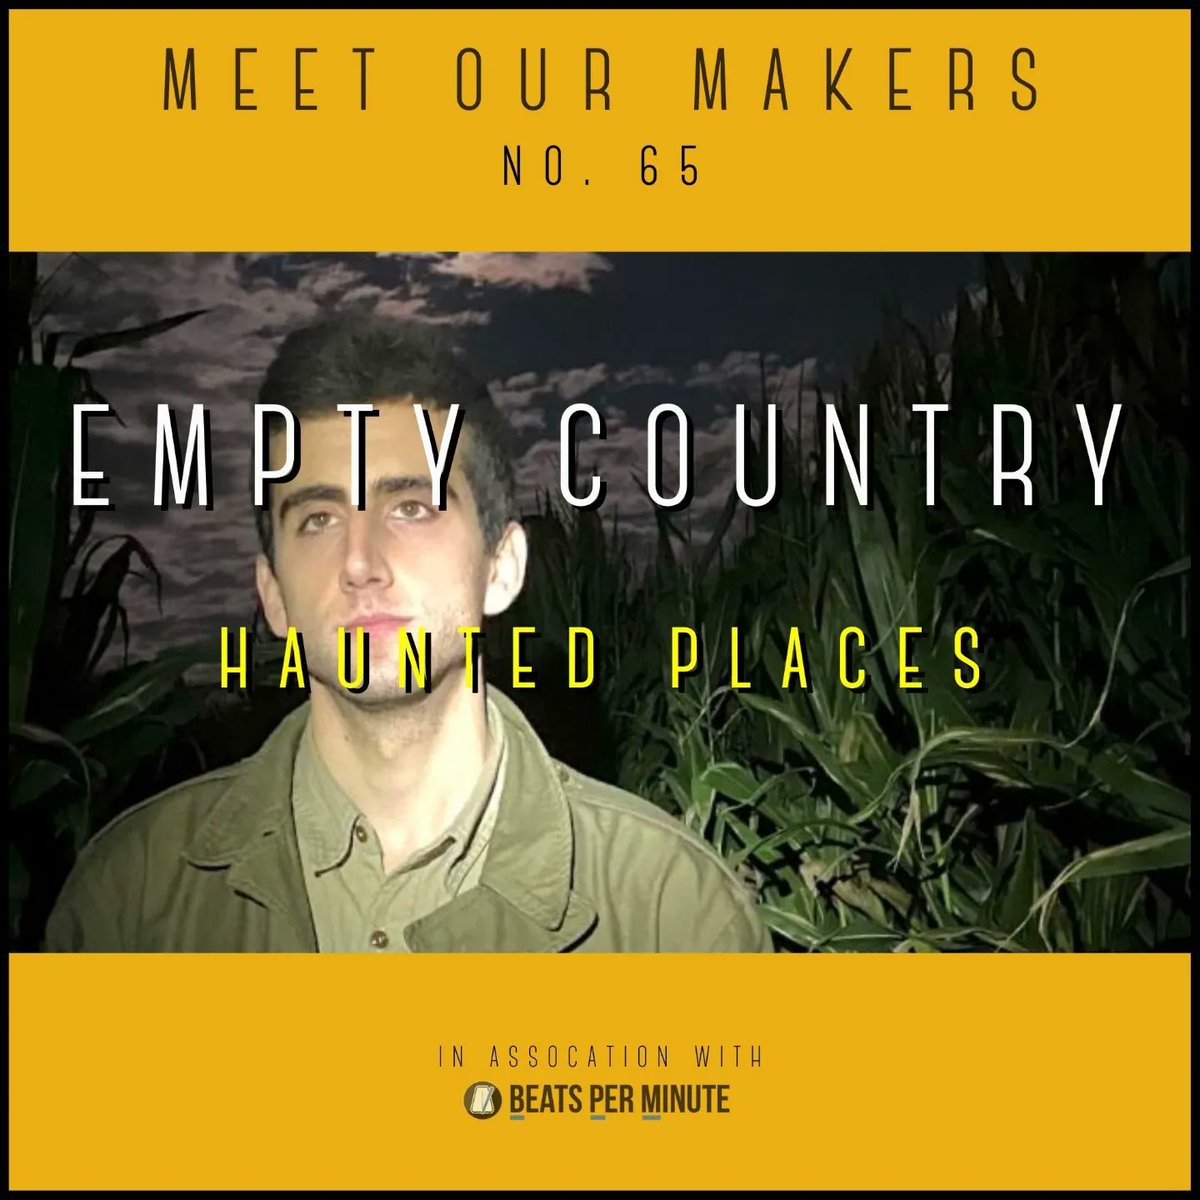 I have TWO new episodes of my show today..listen below! Follow @MeetOurMakers_ for more!

1. Actor and author Illeana Douglas:
open.spotify.com/episode/0YyMLN…

2. Joe from Empty Country (formerly of Cymbals Eat Guitars):open.spotify.com/episode/0Jjf0n…